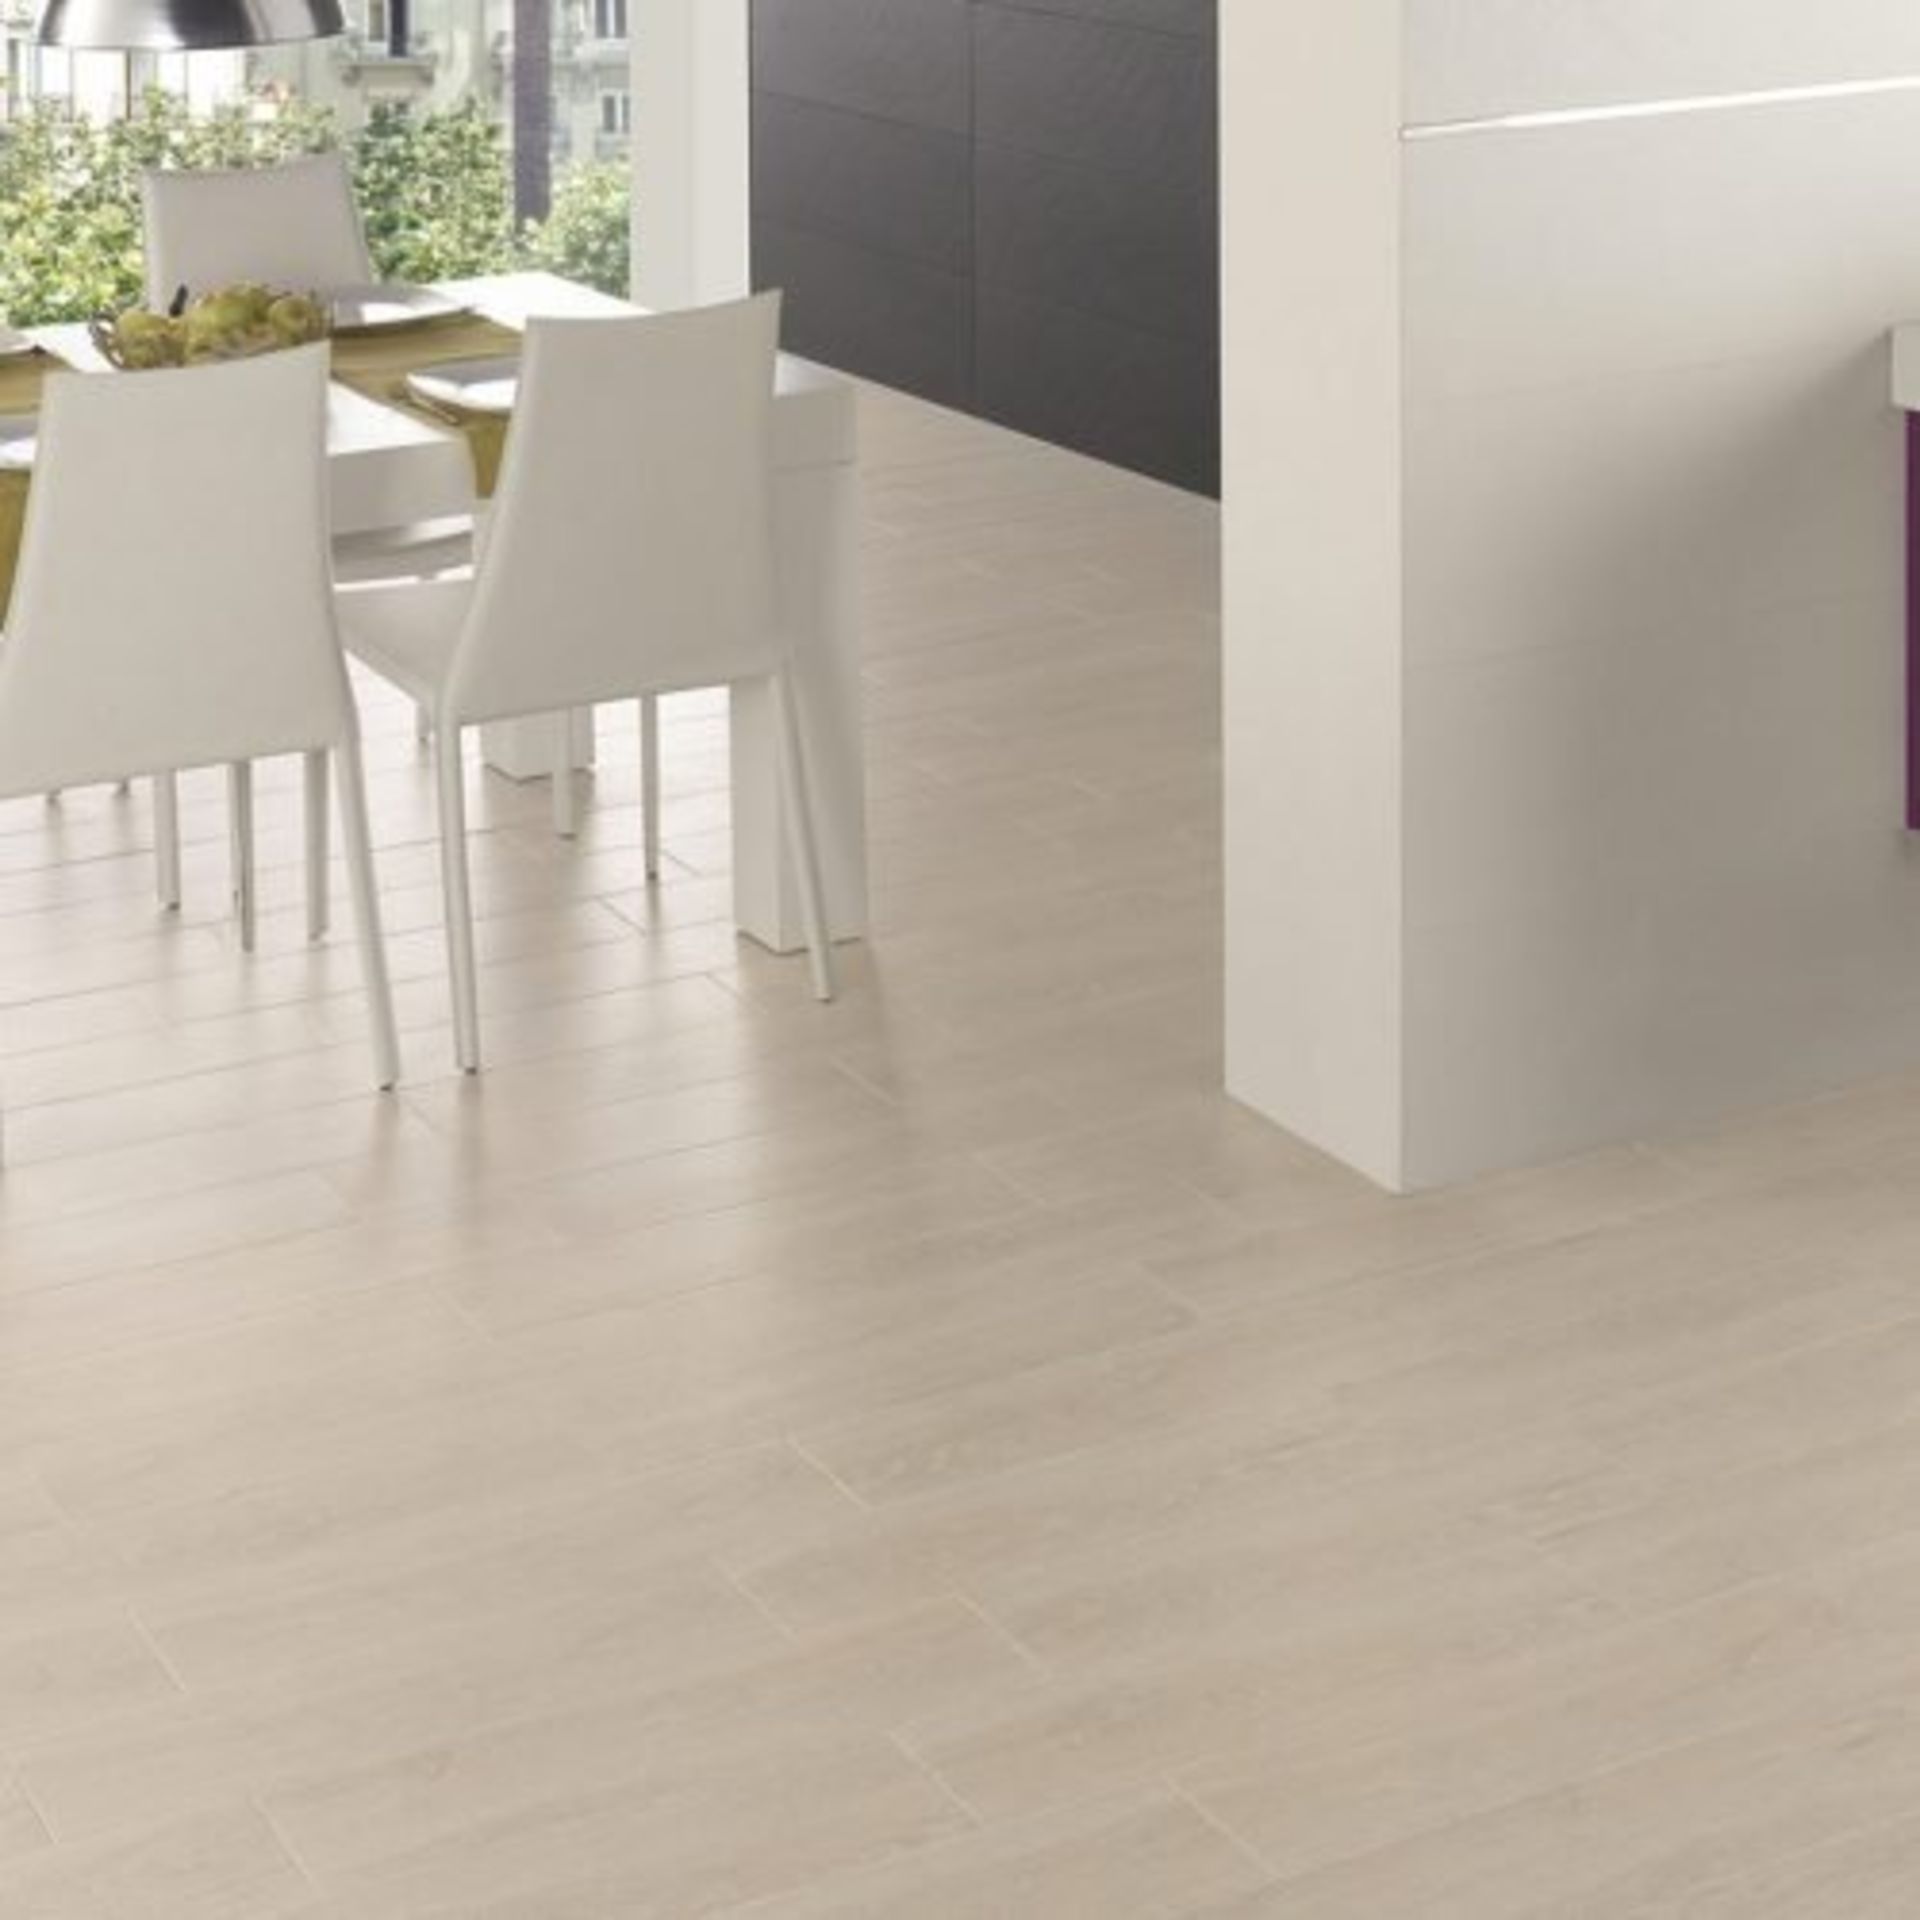 NEW 8.64m2 Timber Grain Wall and Floor Tiles. 600x600mm per tile. 10mm thick. This series is...